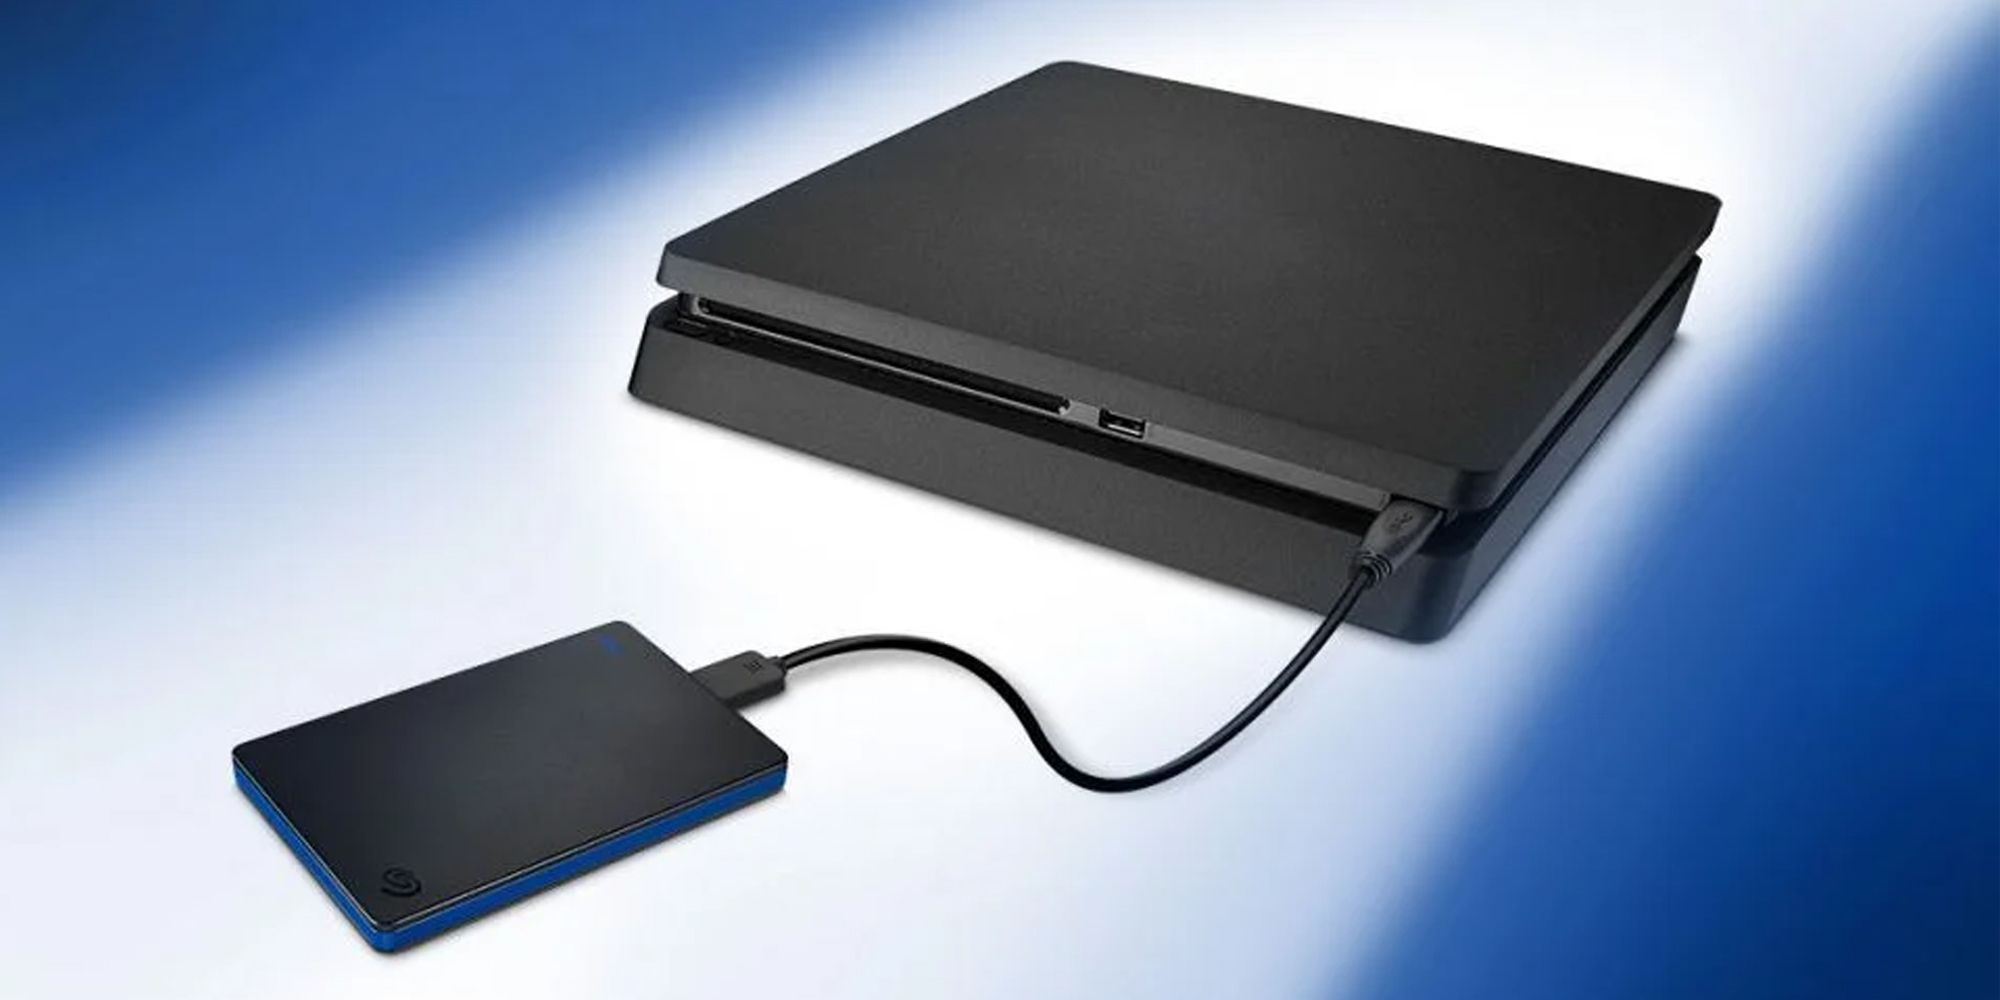 PS4 HDD Connected To Console